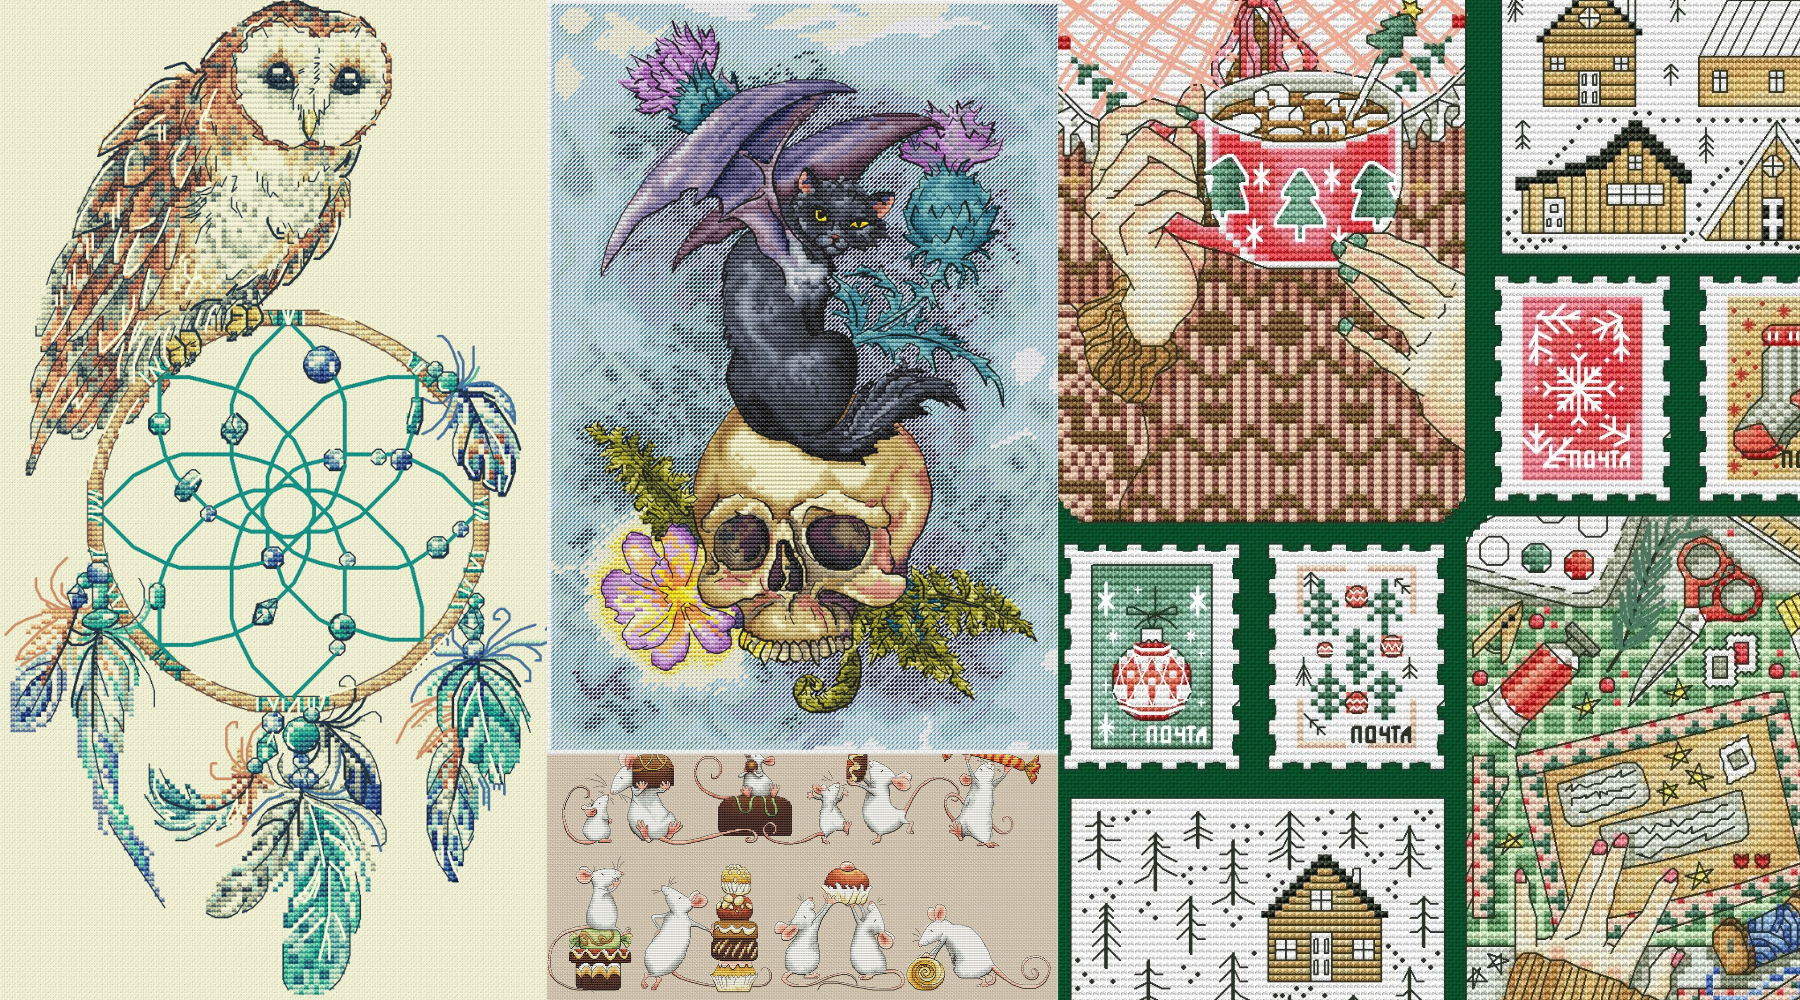 Paintcolor Peacock Stamped Cross Stitch Kits for Adults Beginners Animals Art DIY Cross Stitch Patterns Kits Printed Dimensions Needlepoint Kitscrafts